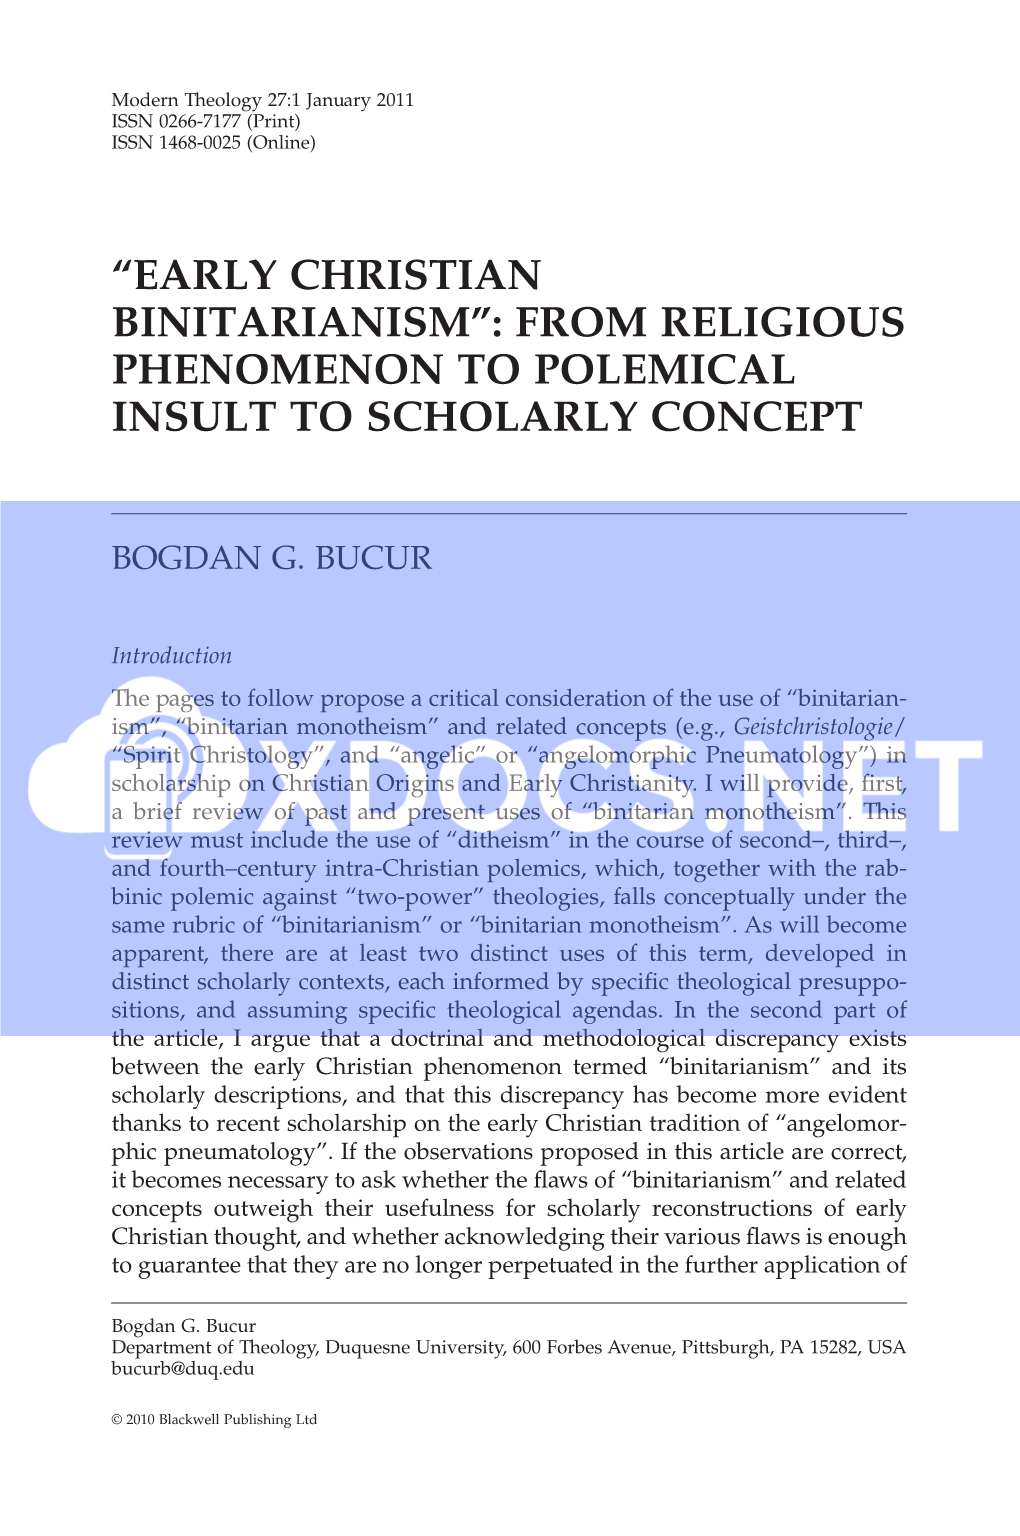 Early Christian Binitarianism”: from Religious Phenomenon to Polemical